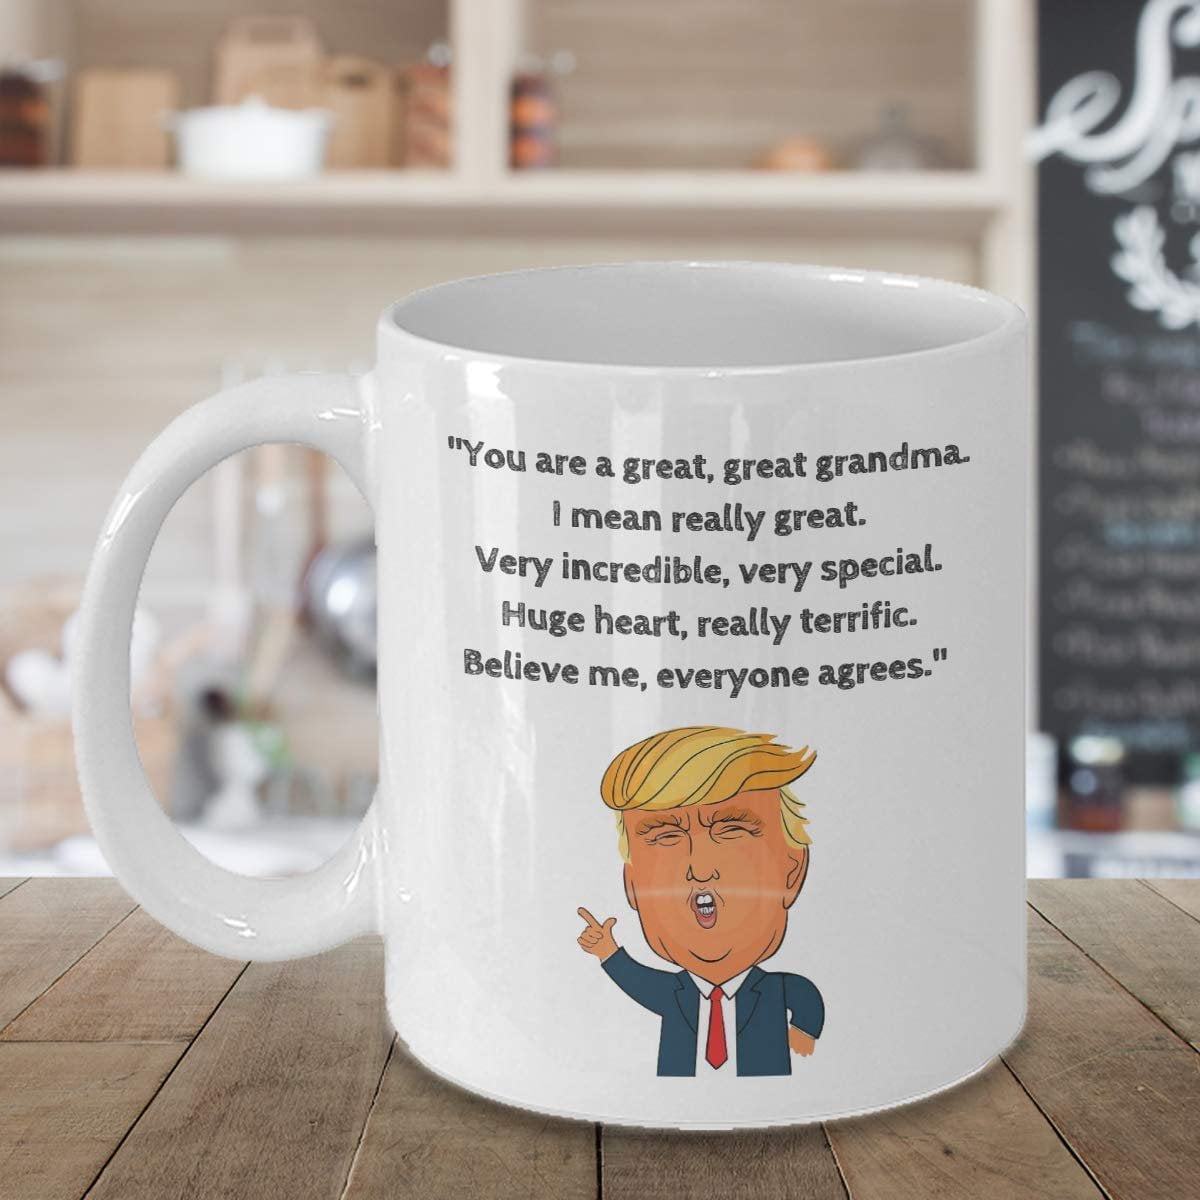 Details about   Funny trump joke mug grandma gift cup You are a great Grandma very special